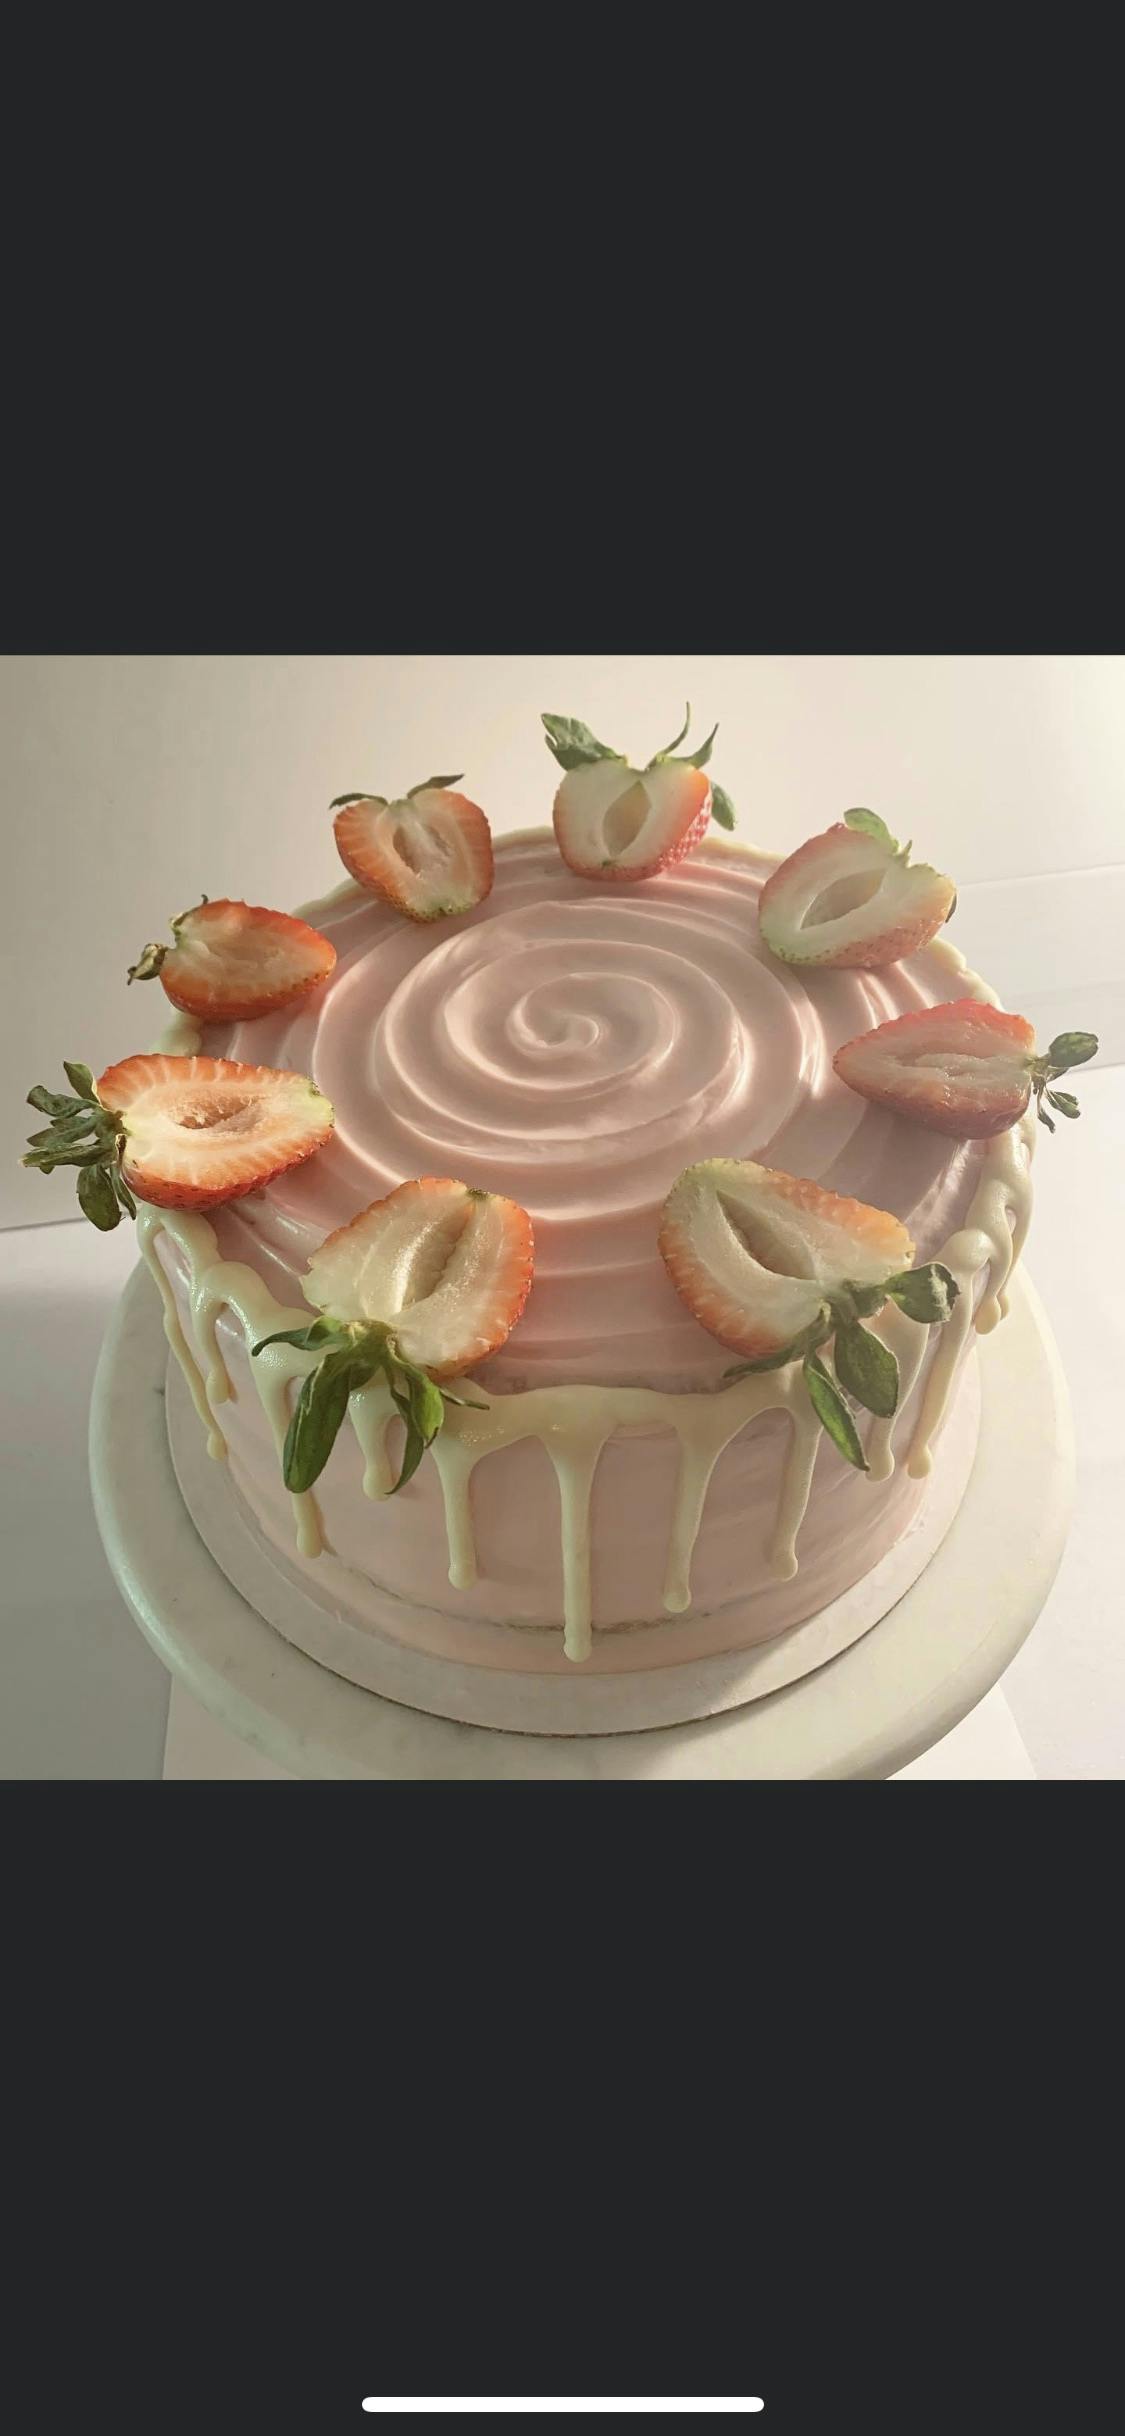 7inch Strawberry cake with cream cheese icing.